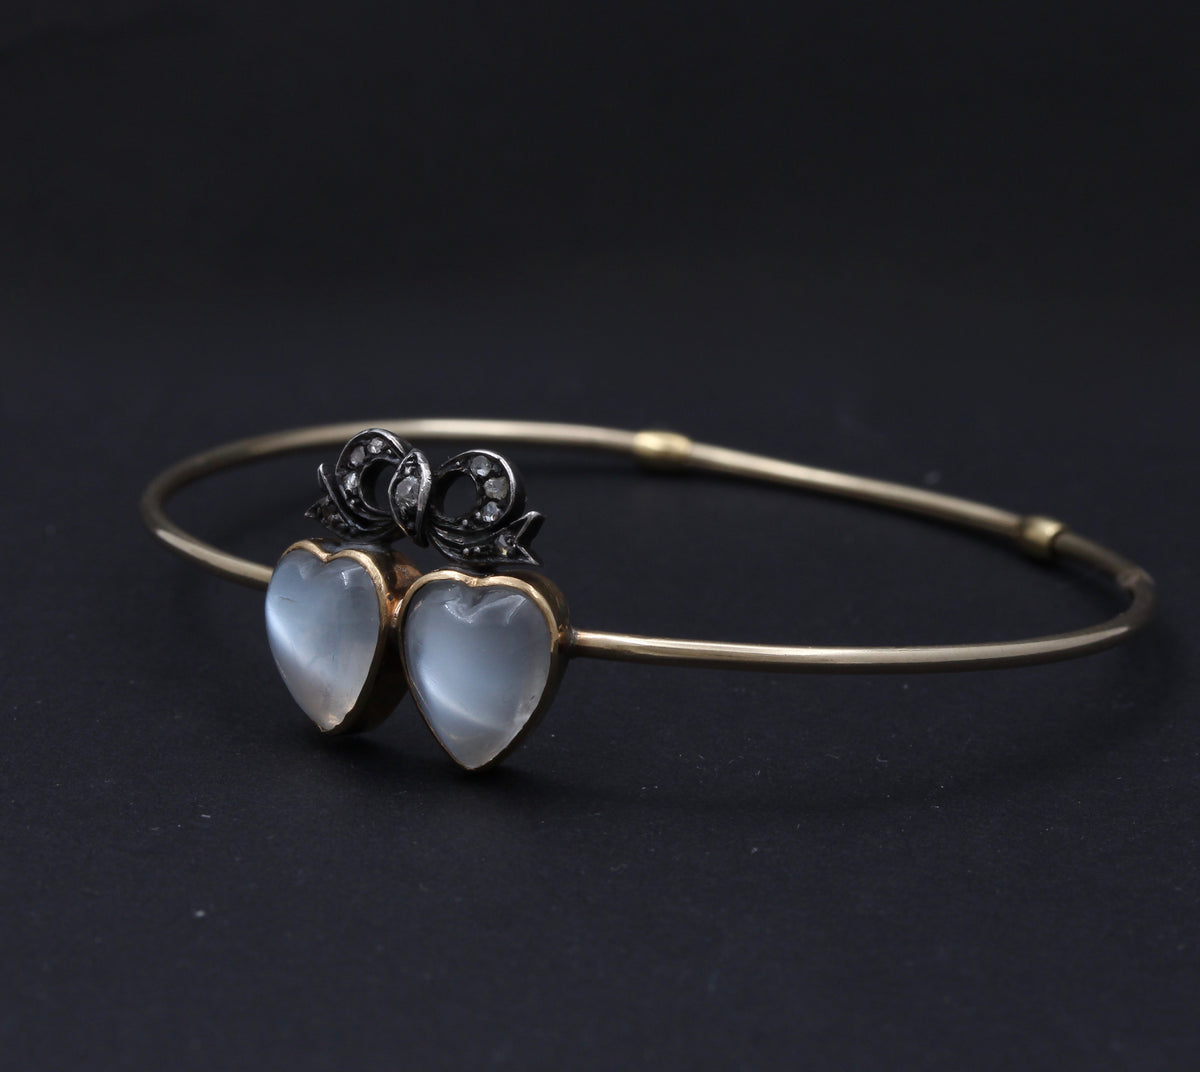 Antique Moonstone and Diamond Double Heart and Bow Bangle Bracelet